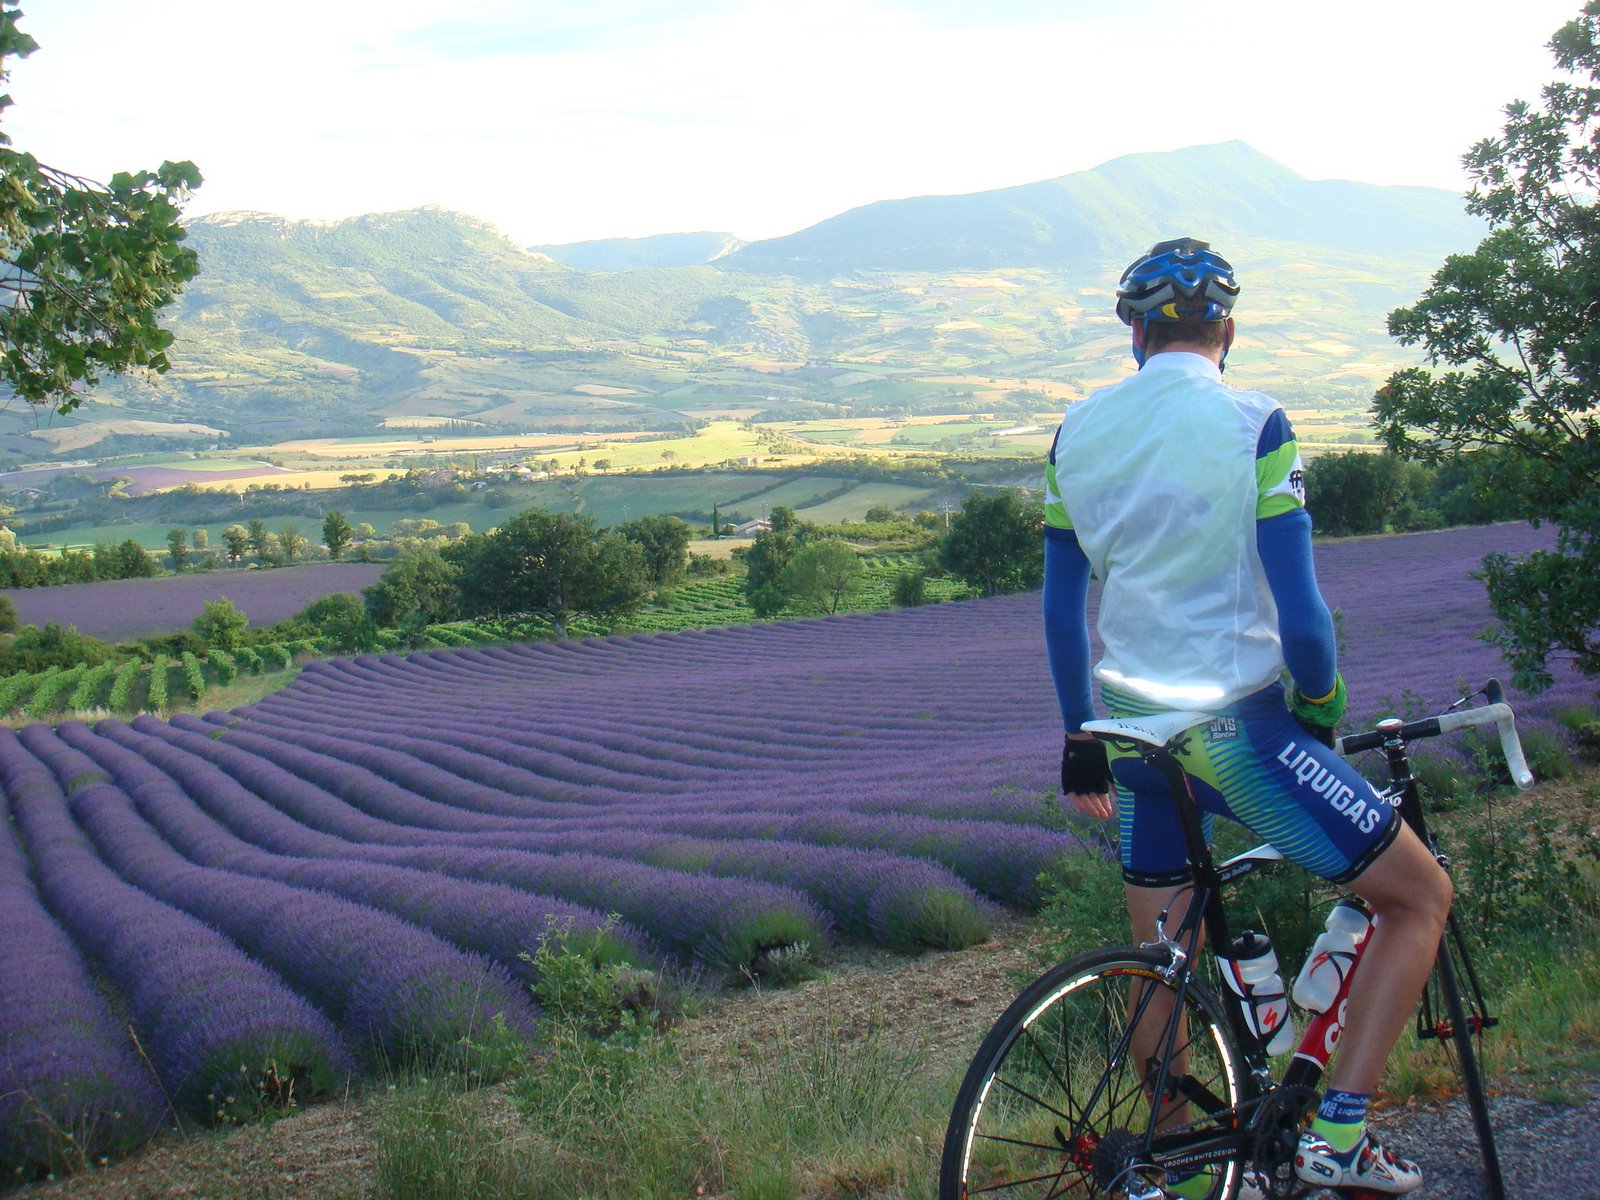 Cyclomundo rider looking upon the Lavender fields